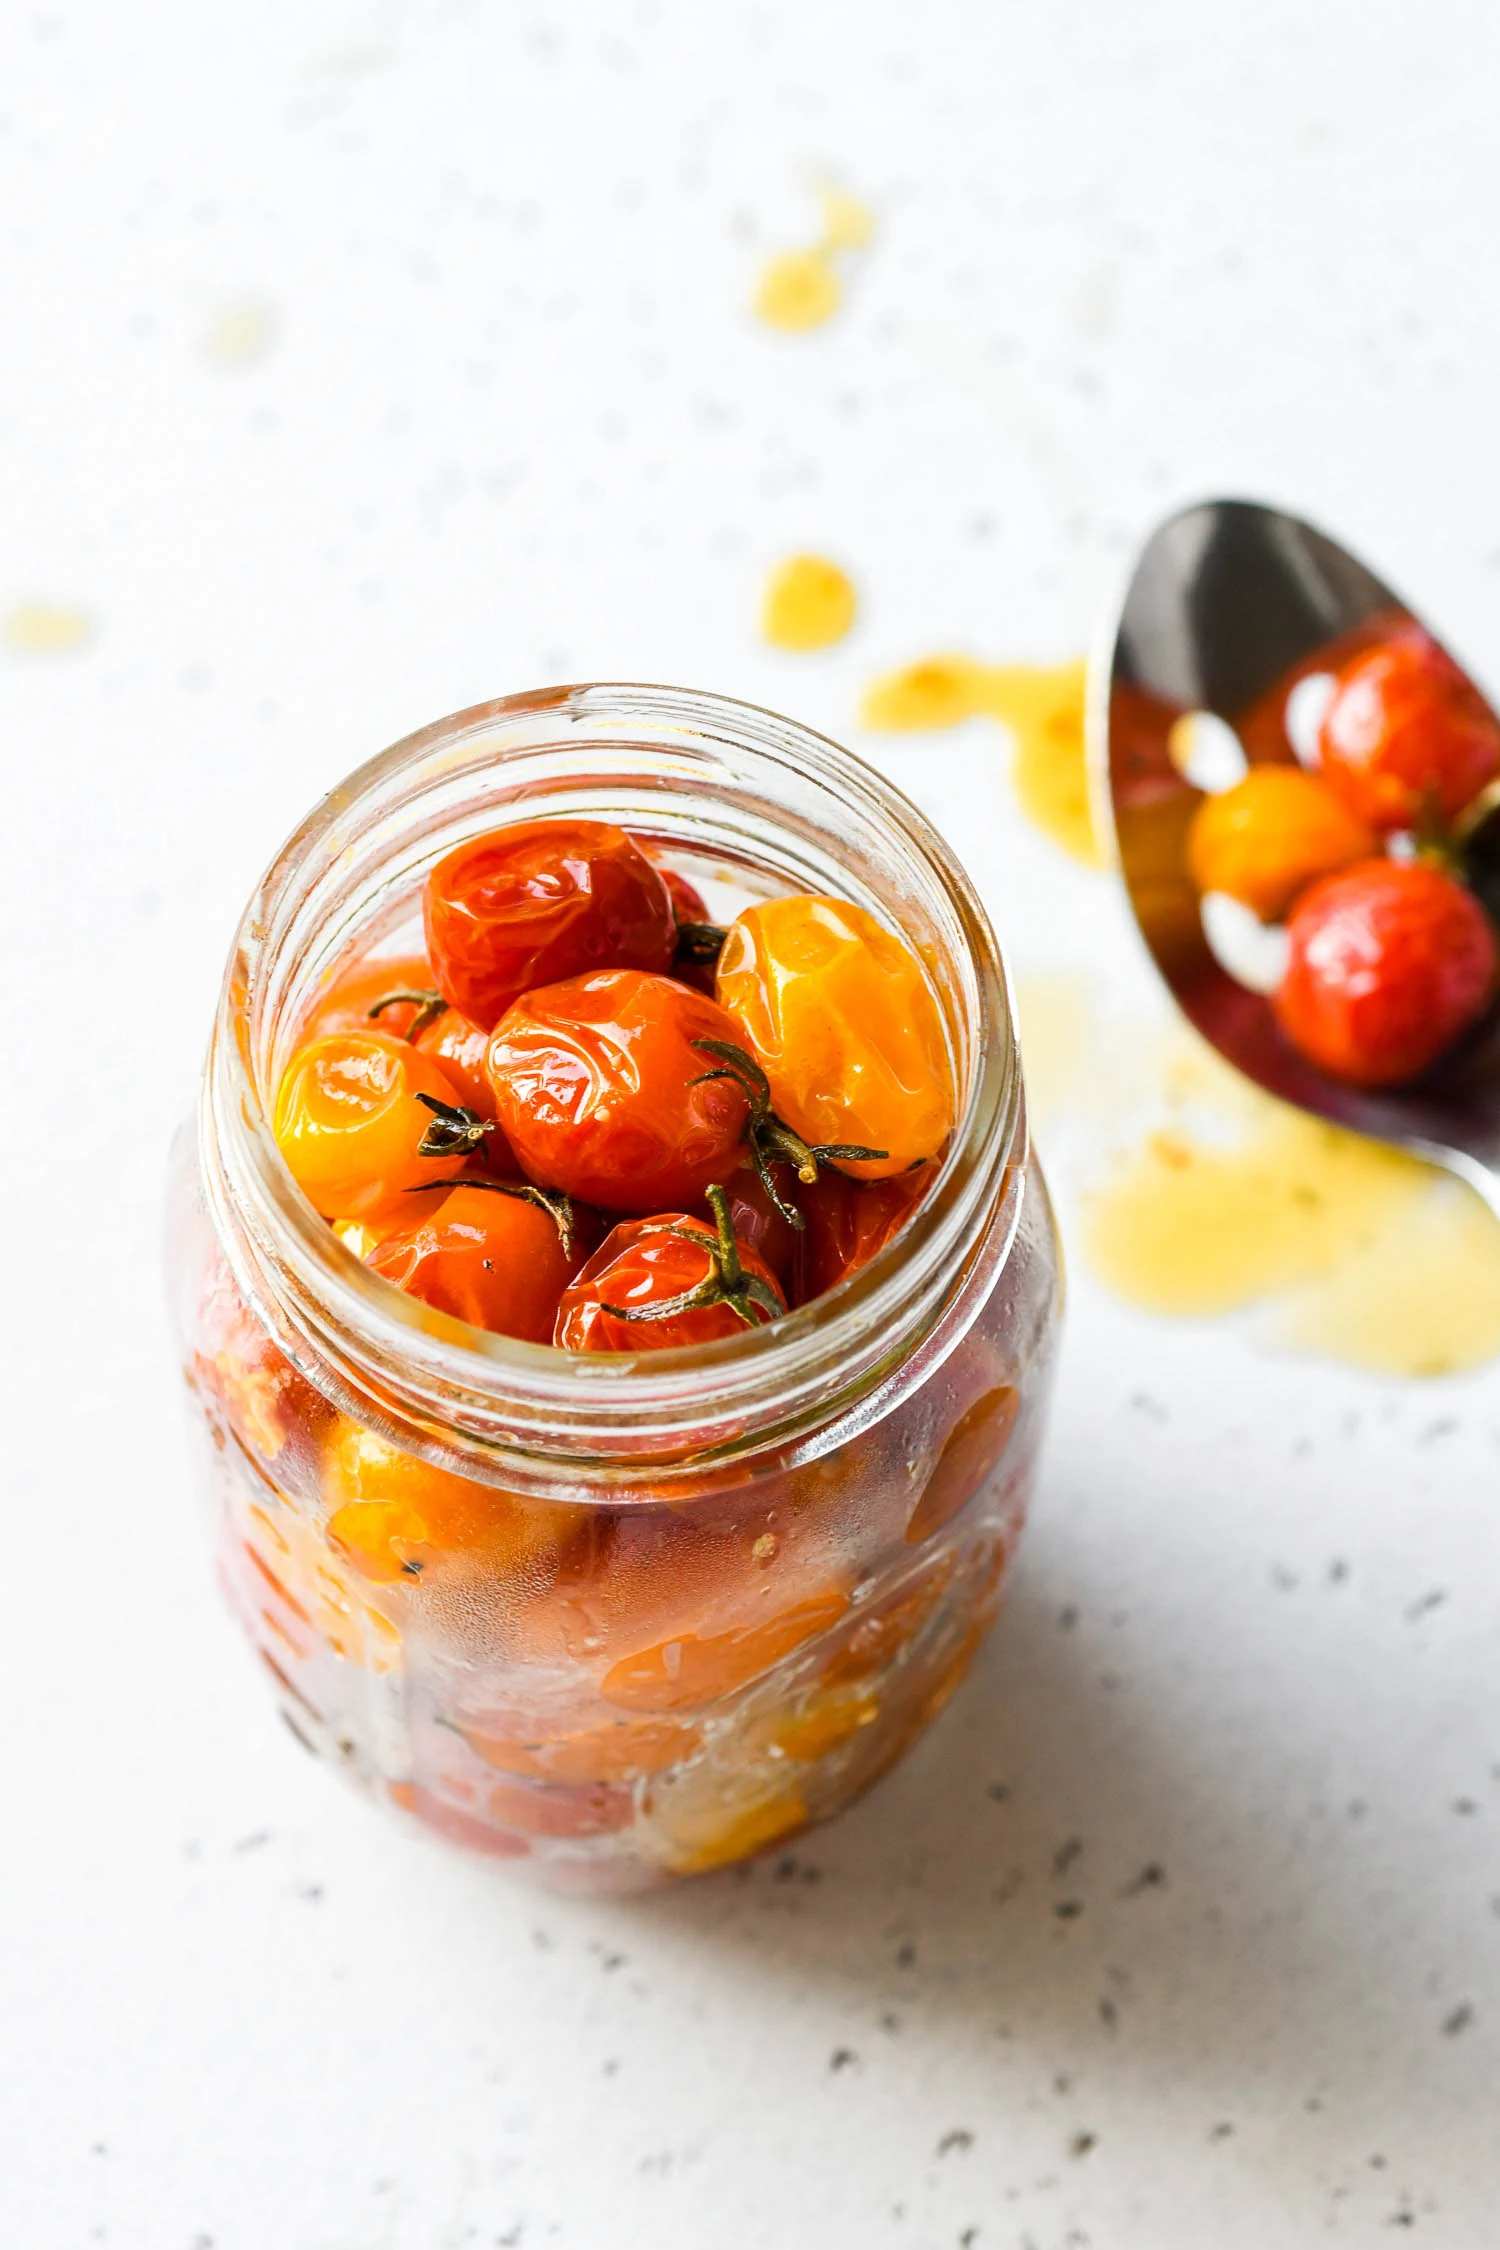 cherry tomatoes in a ball canning jar